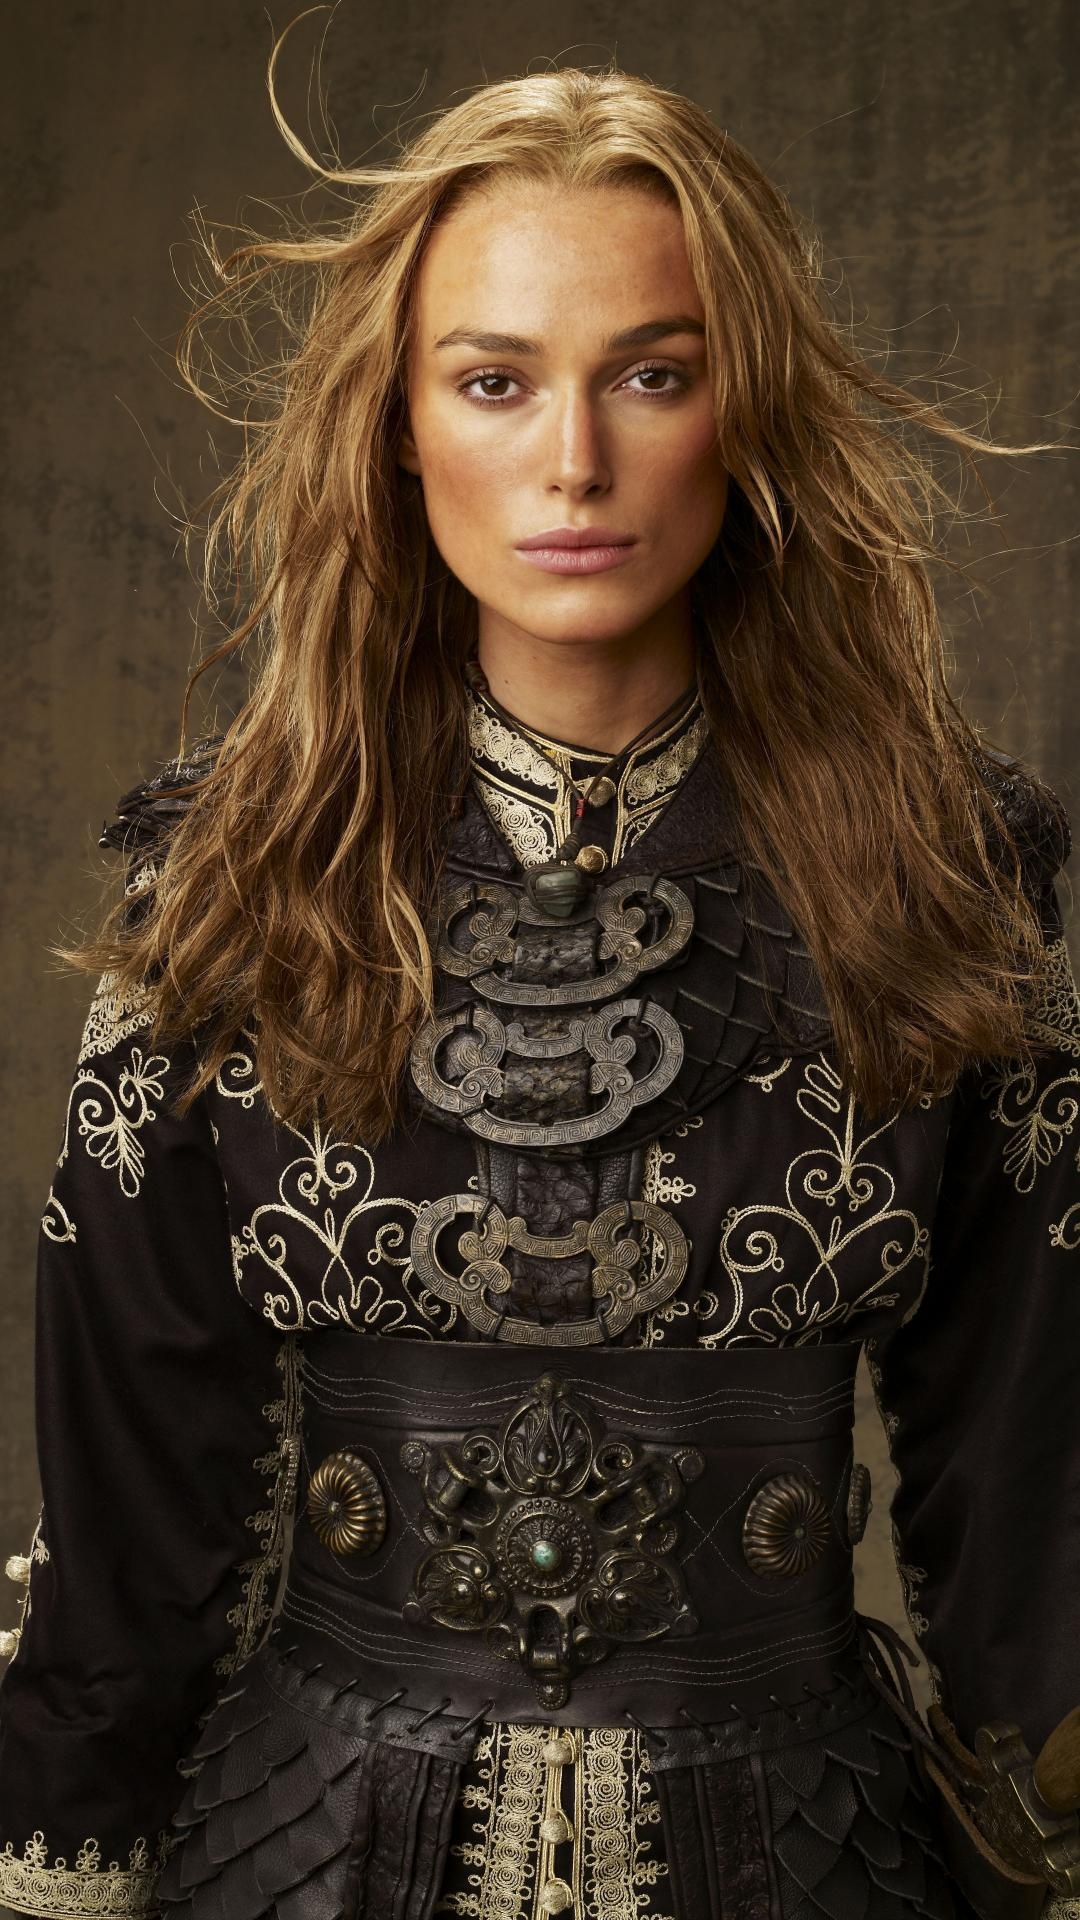 Elizabeth Swann wallpapers, Stunning backgrounds, High definition, Pirate princess, 1080x1920 Full HD Handy